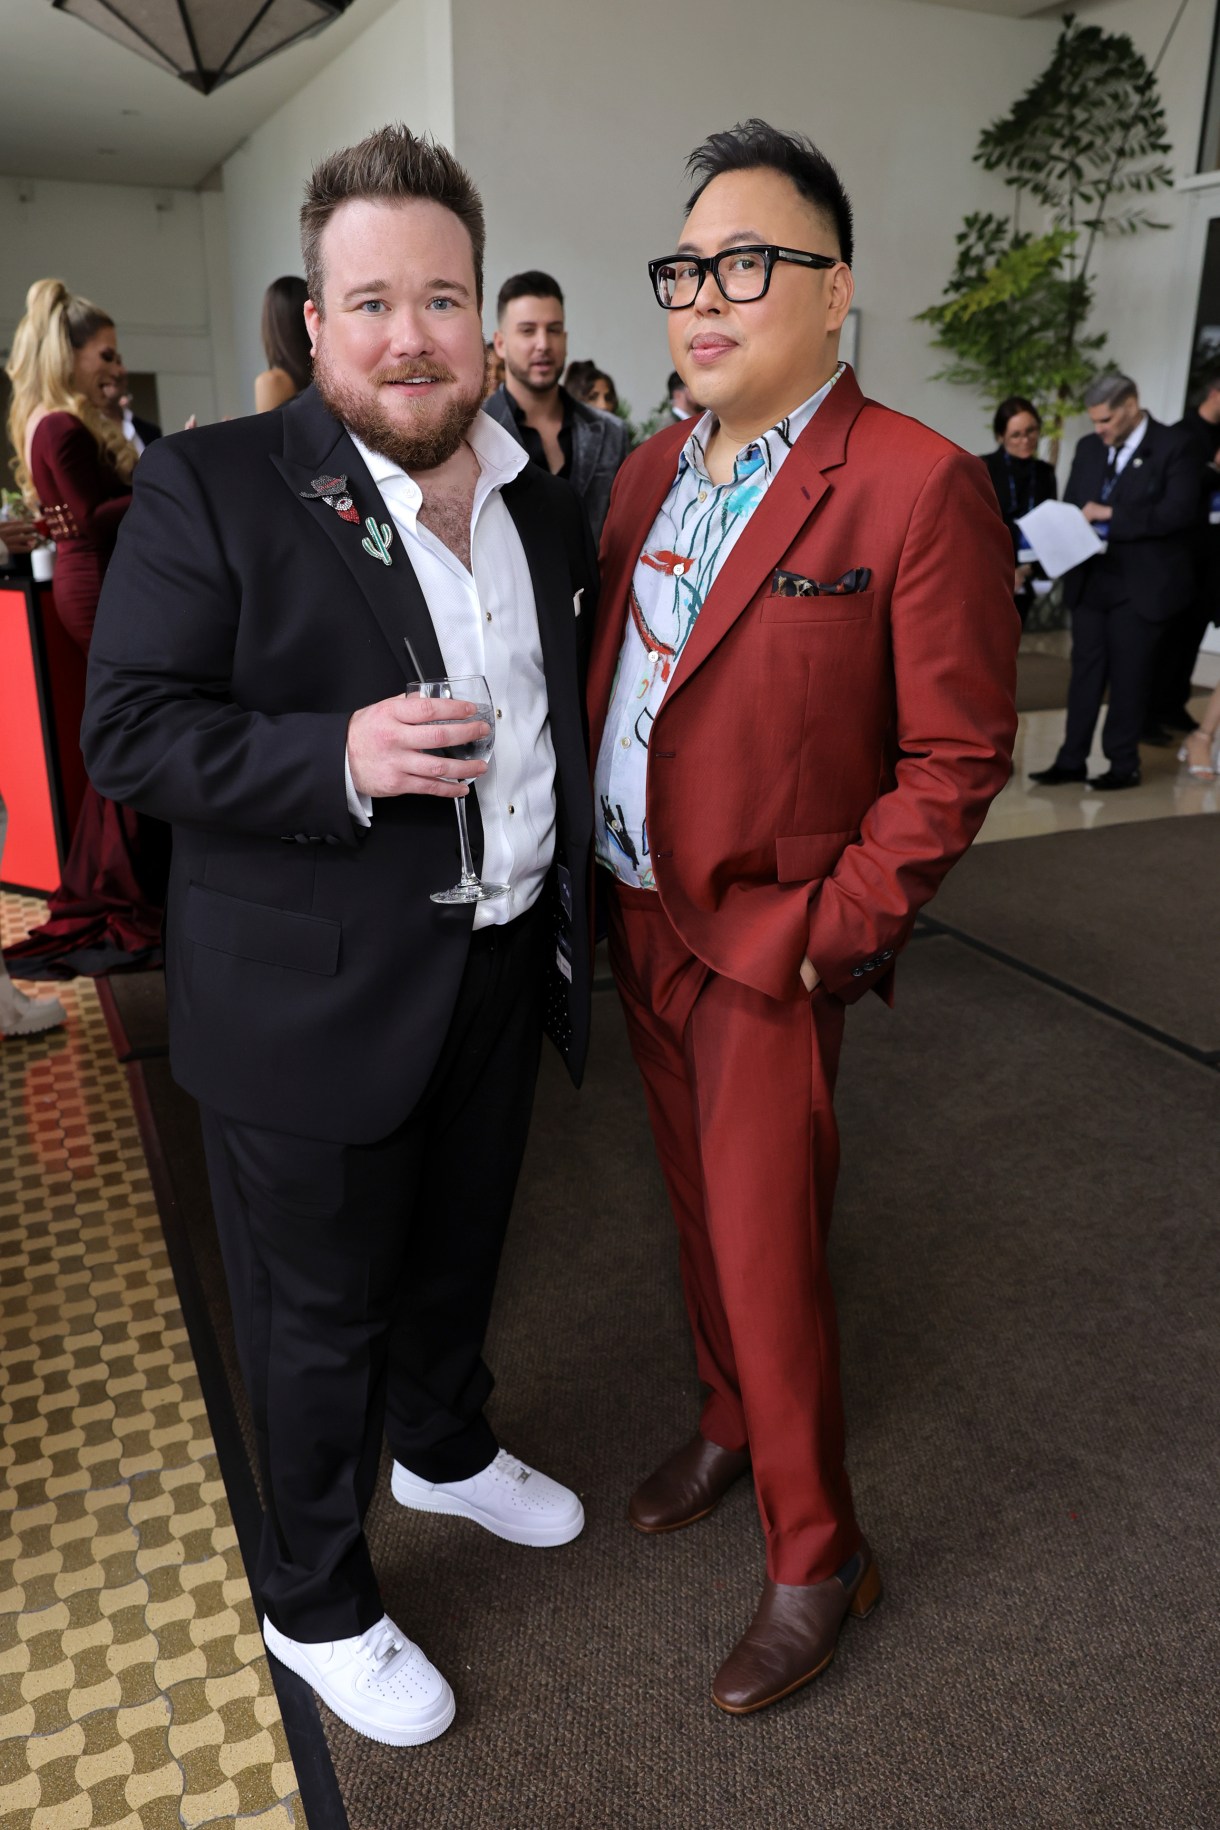 BEVERLY HILLS, CALIFORNIA - APRIL 02: (L-R) Zeke Smith and Nico Santos attend The 33rd Annual GLAAD Media Awards at The Beverly Hilton on April 02, 2022 in Beverly Hills, California. (Photo by Randy Shropshire/Getty Images for GLAAD)